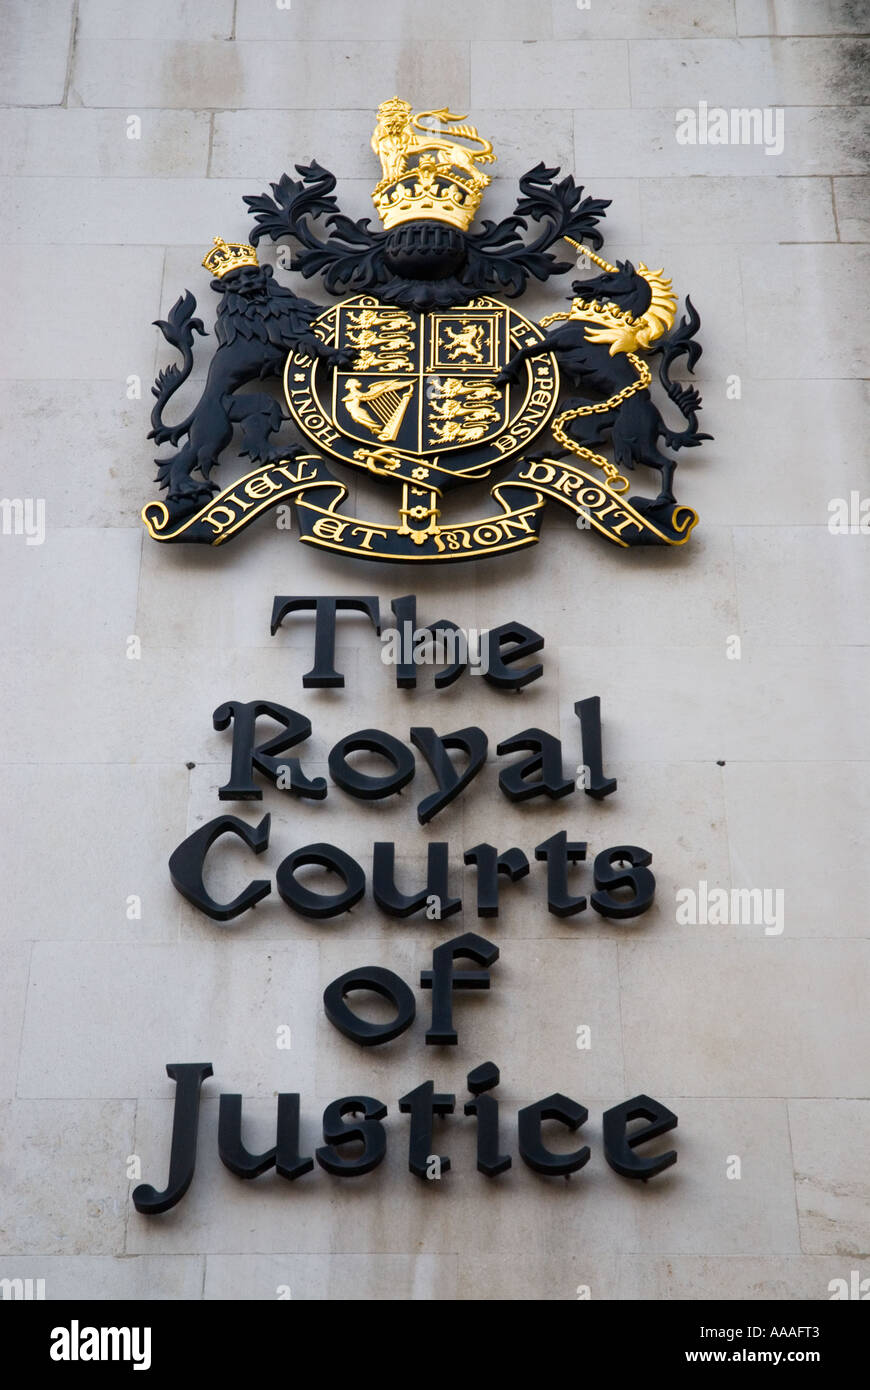 Das Wappen der Royal Courts of Justice in London Stockfoto